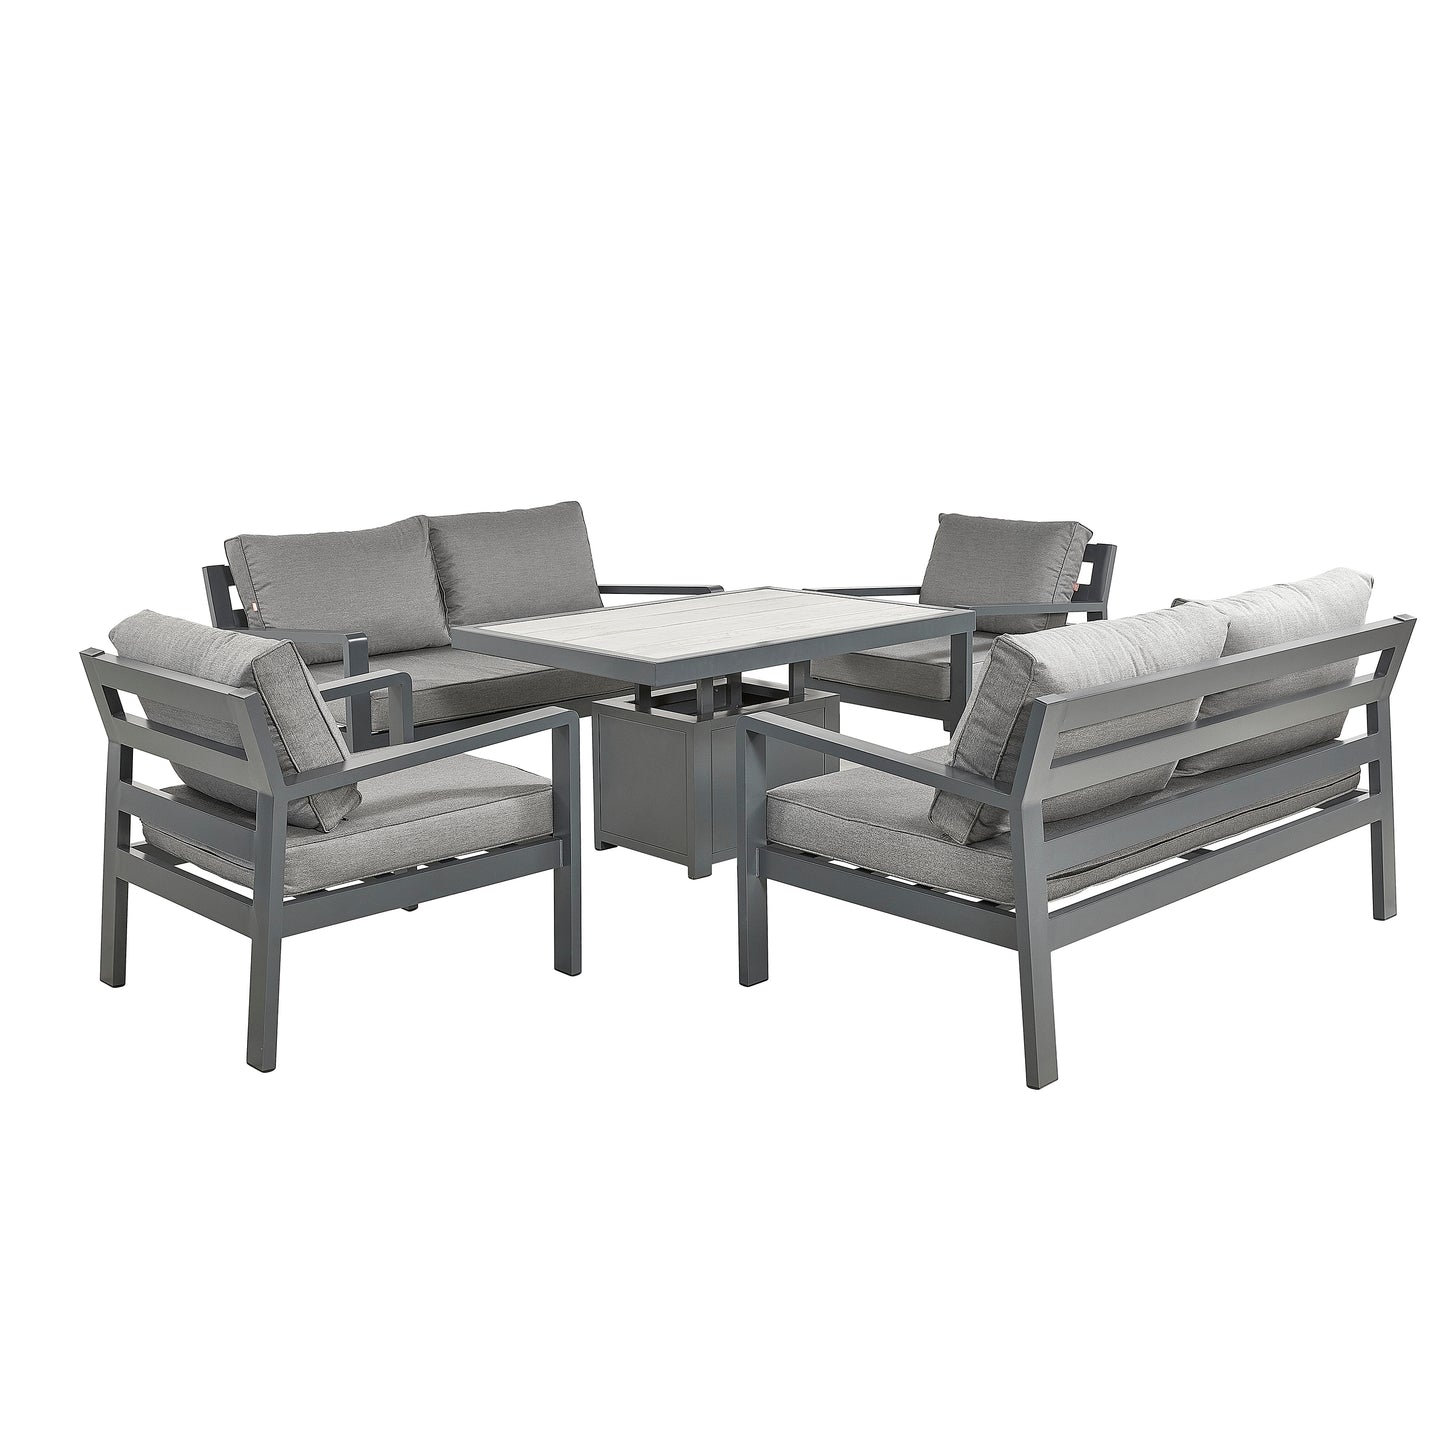 HEX Living - Tutbury Dual Height Rectangular Table with Two Sofas and Two Chairs